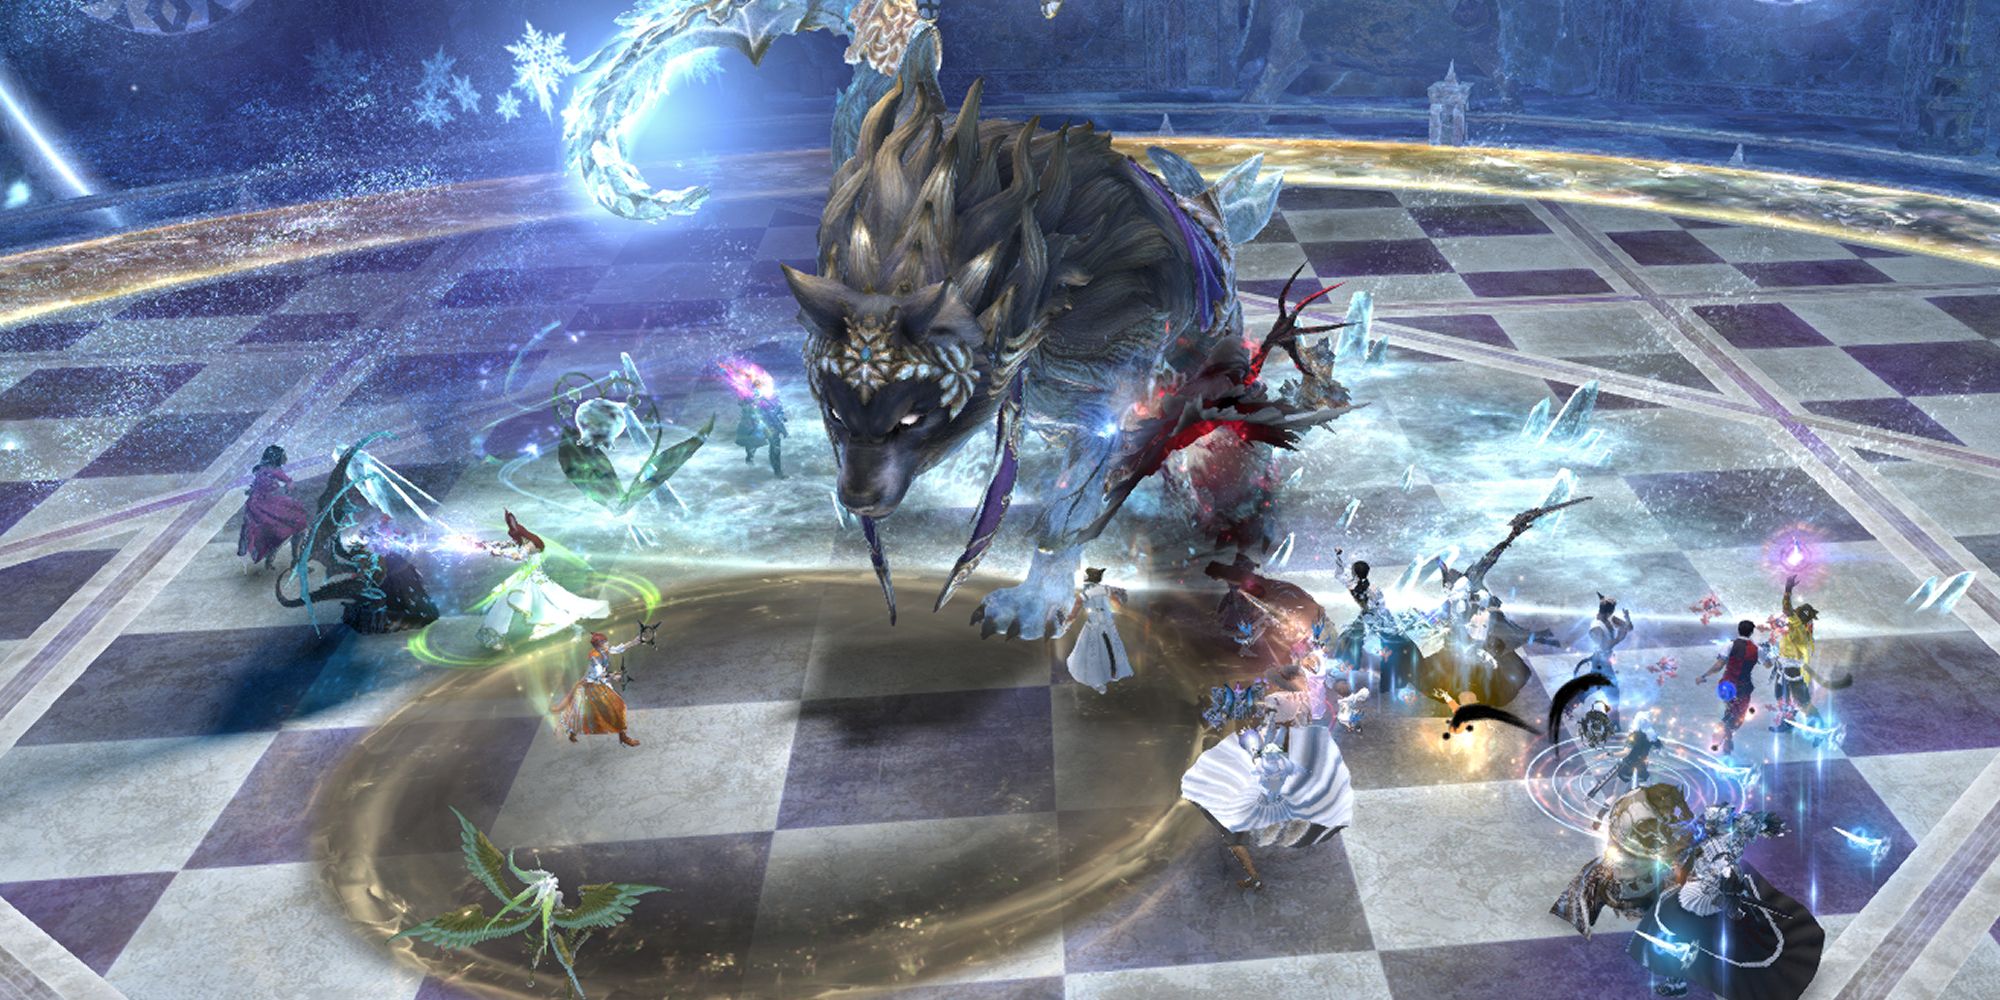 An image of Menphina from Final Fantasy 14's Euphrosyne raid, performing a combo attack with her loyal hound, Dalamud. Dalamud is holding a sickle in one paw, telegraphing which half of the arena he is about to strike. 